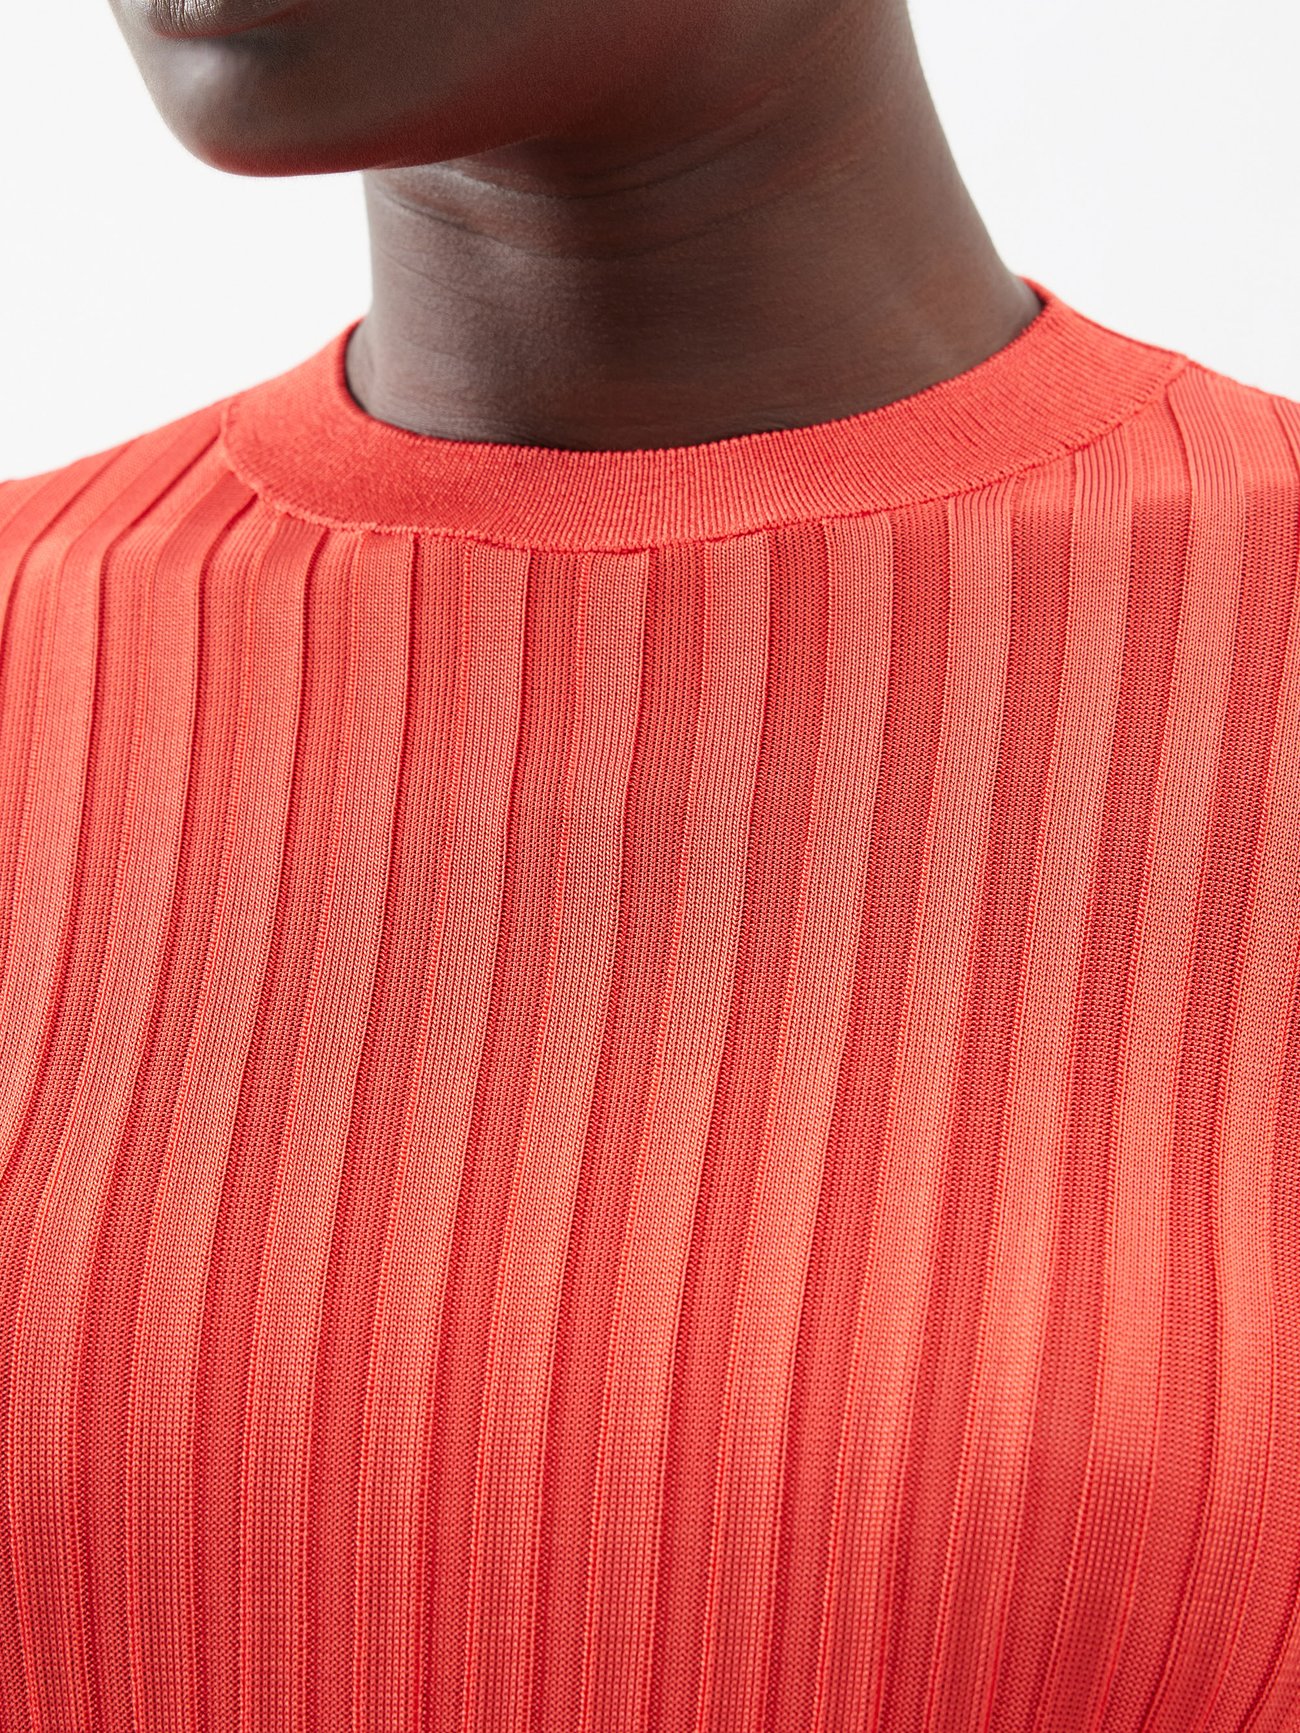 Exaggerated-cuff ribbed-knit sweater